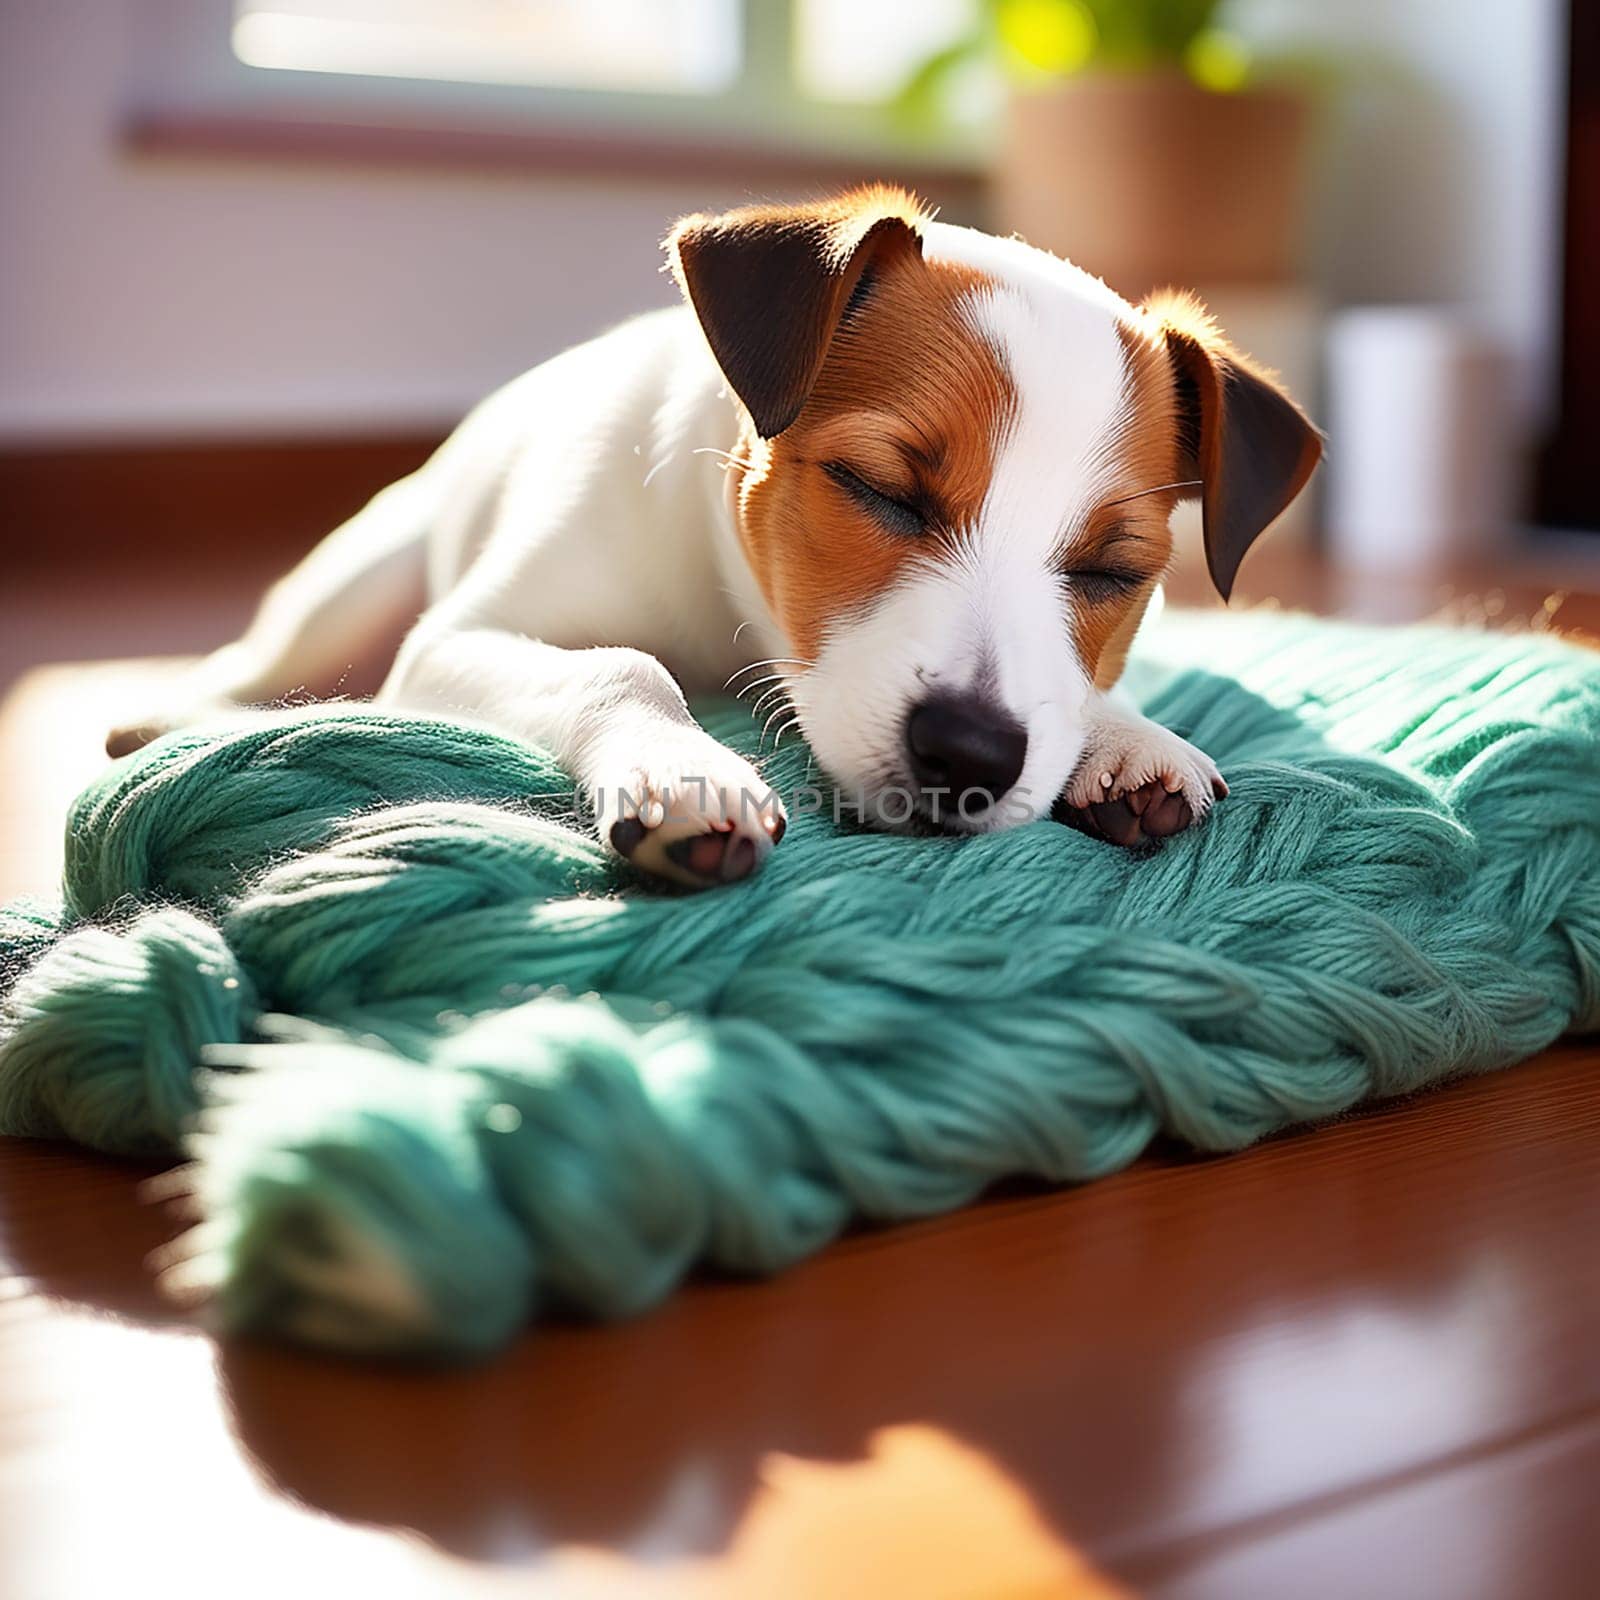 Sunny Day Snooze: Jack Russell Terrier Sleeping on Turquoise Knitted Plaid